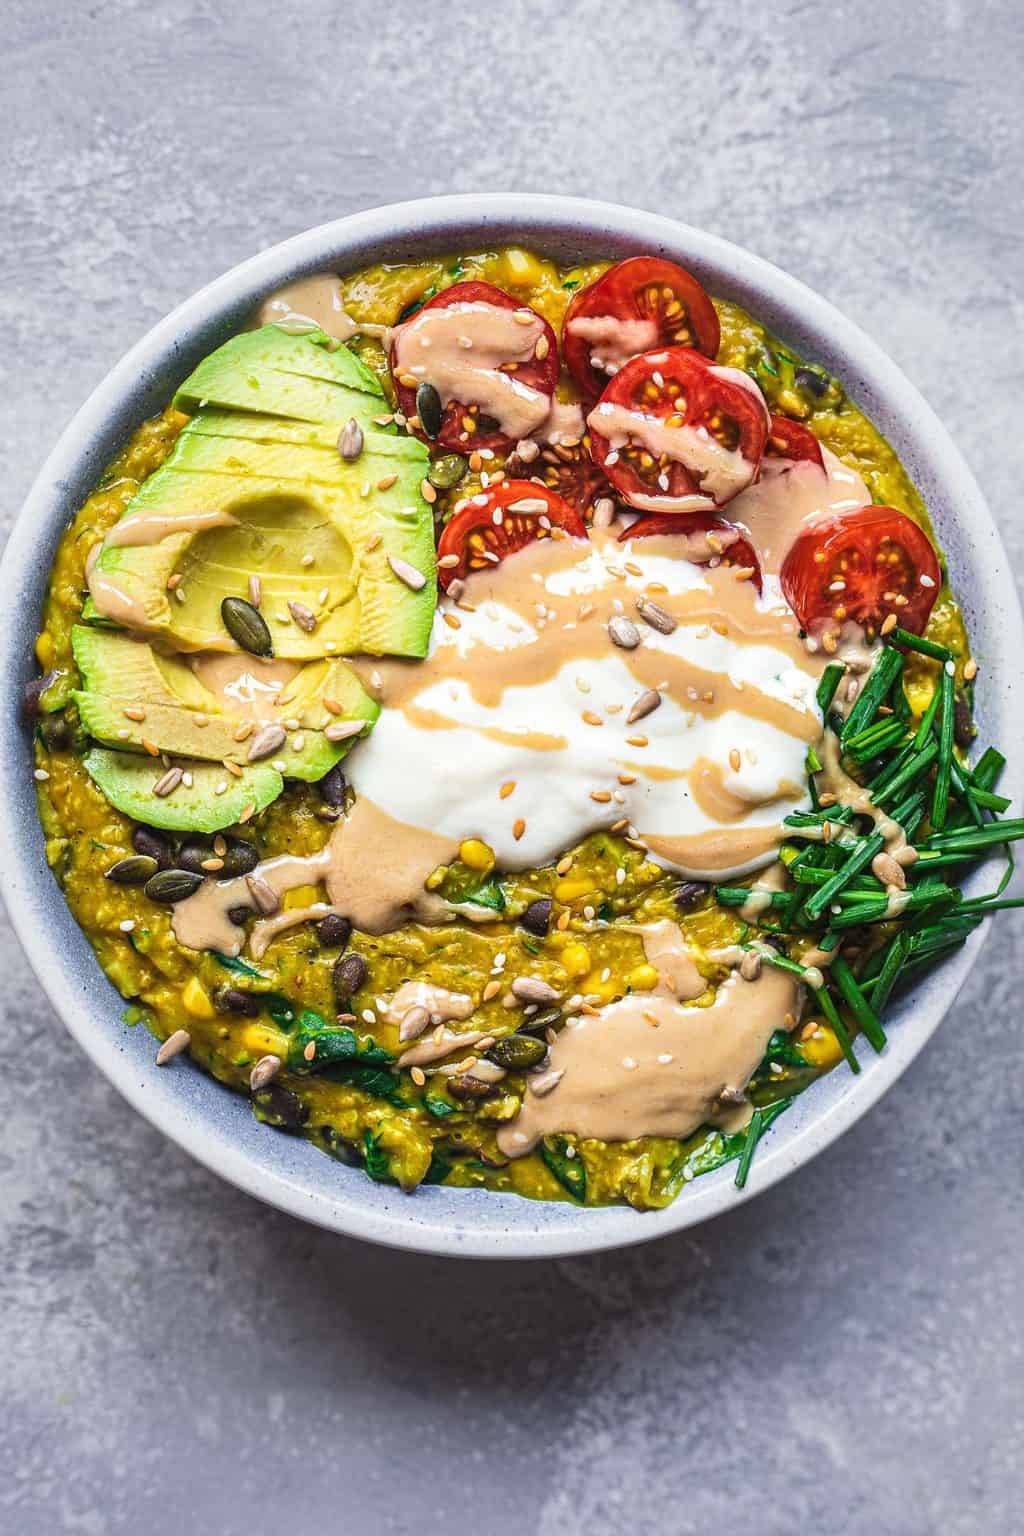 Oats with avocado and vegetables